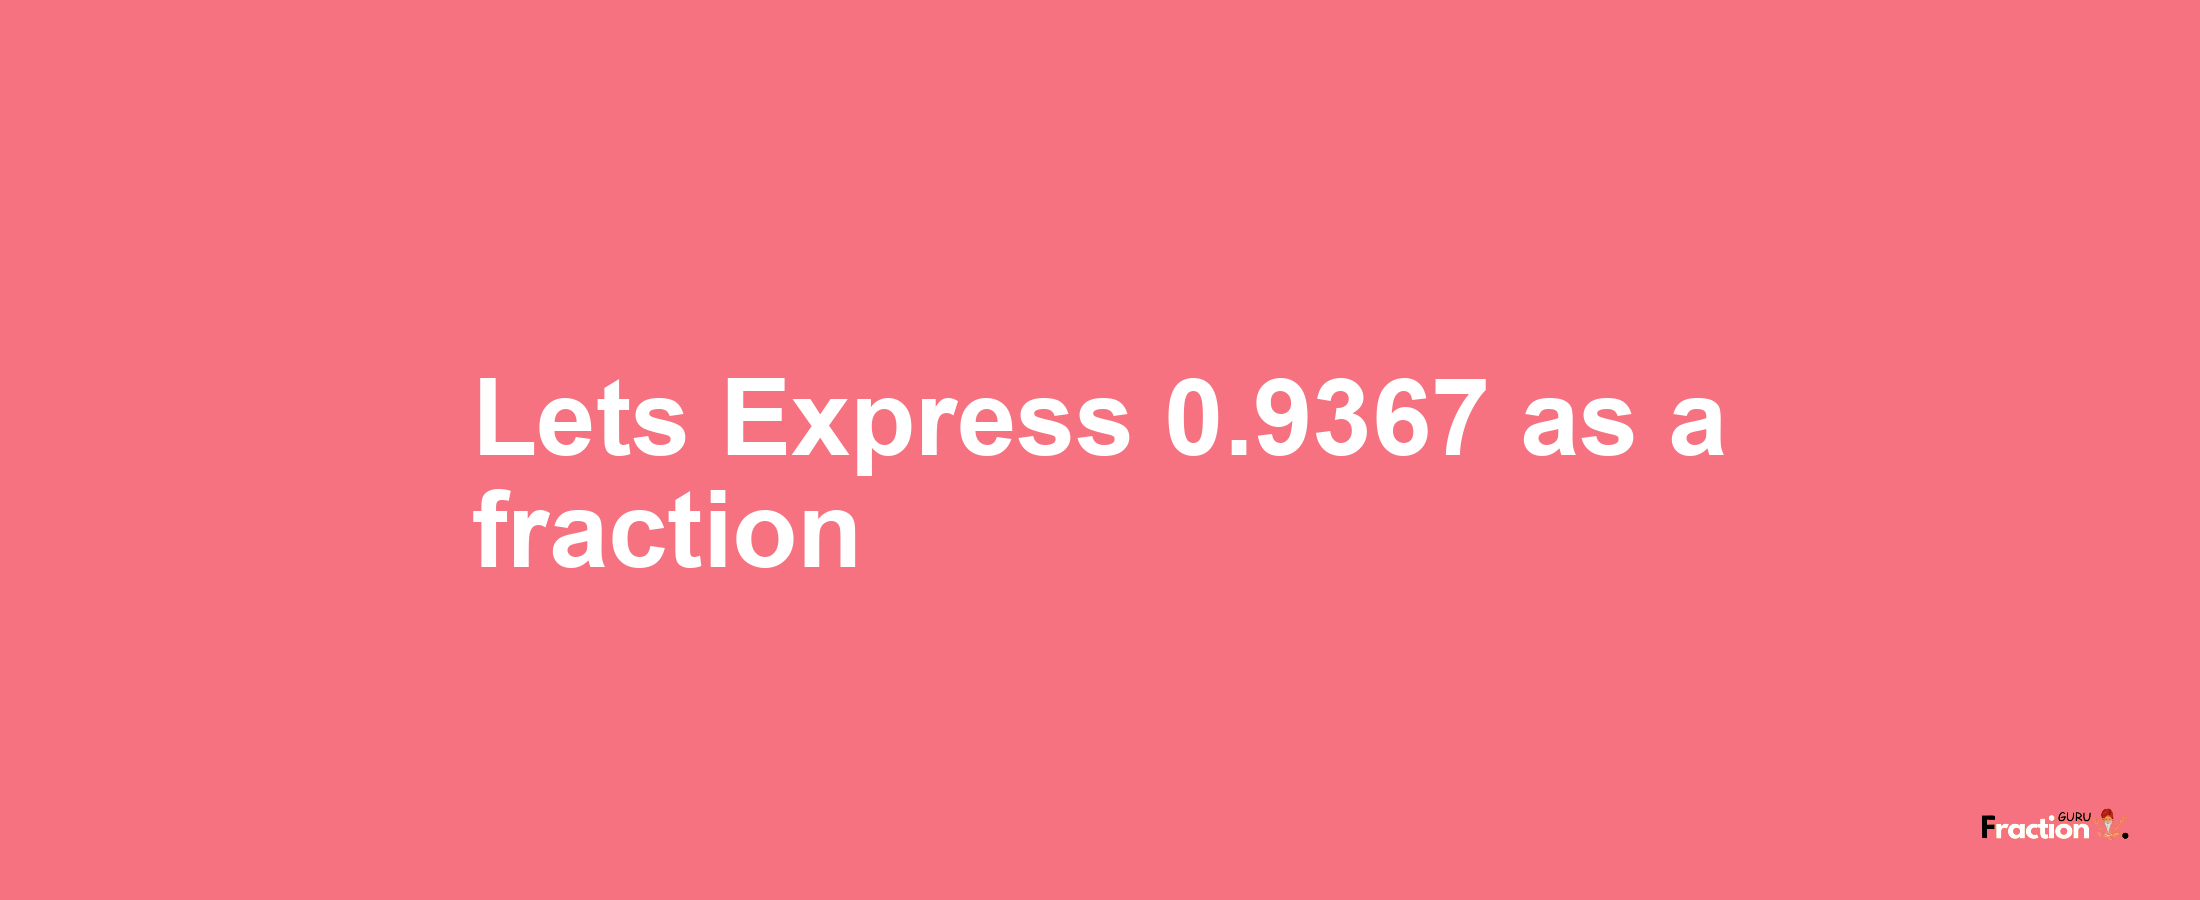 Lets Express 0.9367 as afraction